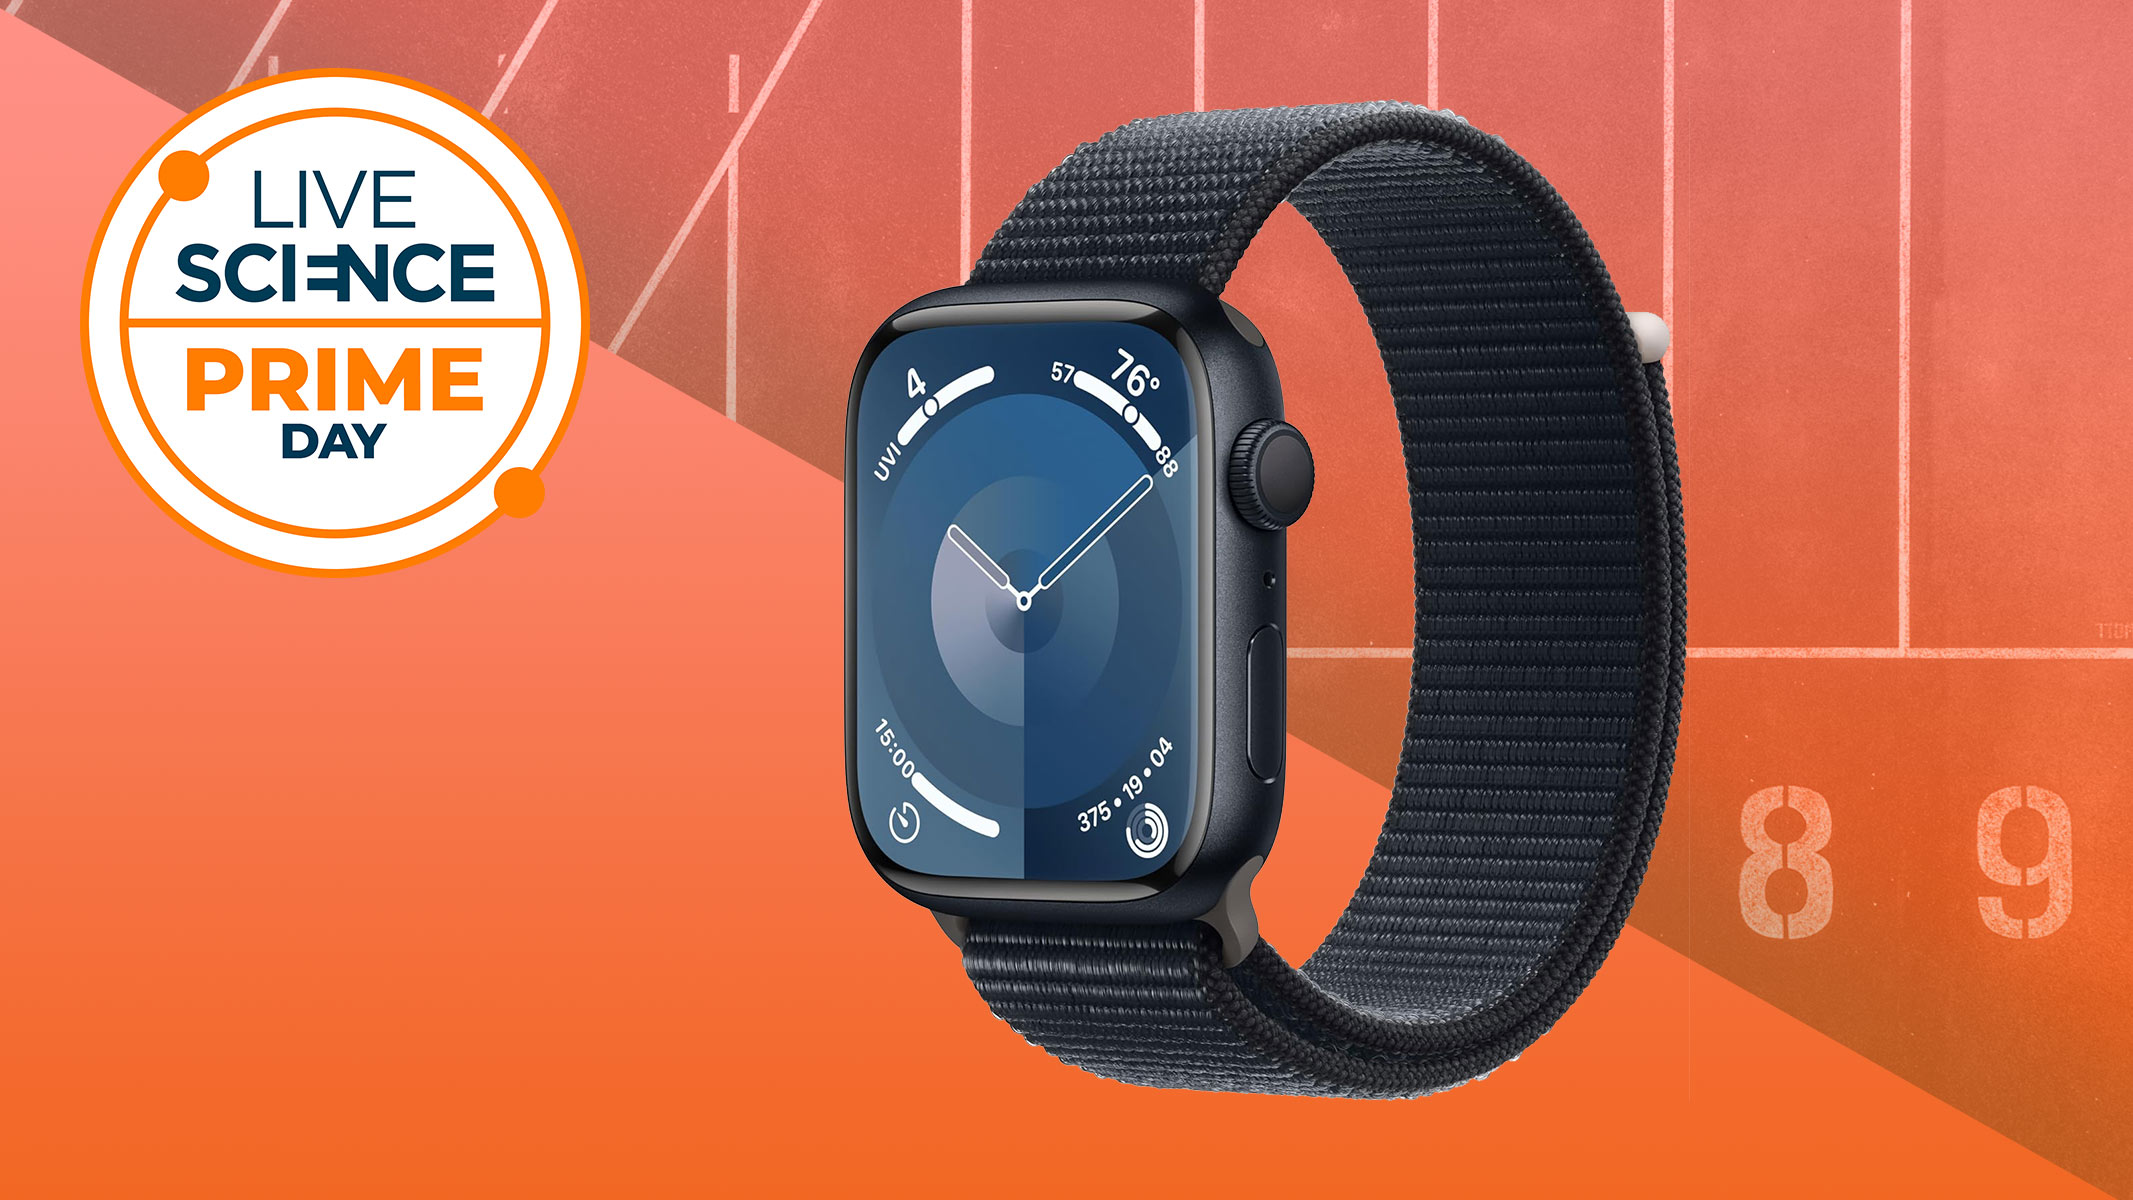  It's your last chance to snap up a 28% discount on the new Apple Watch this Prime Day 